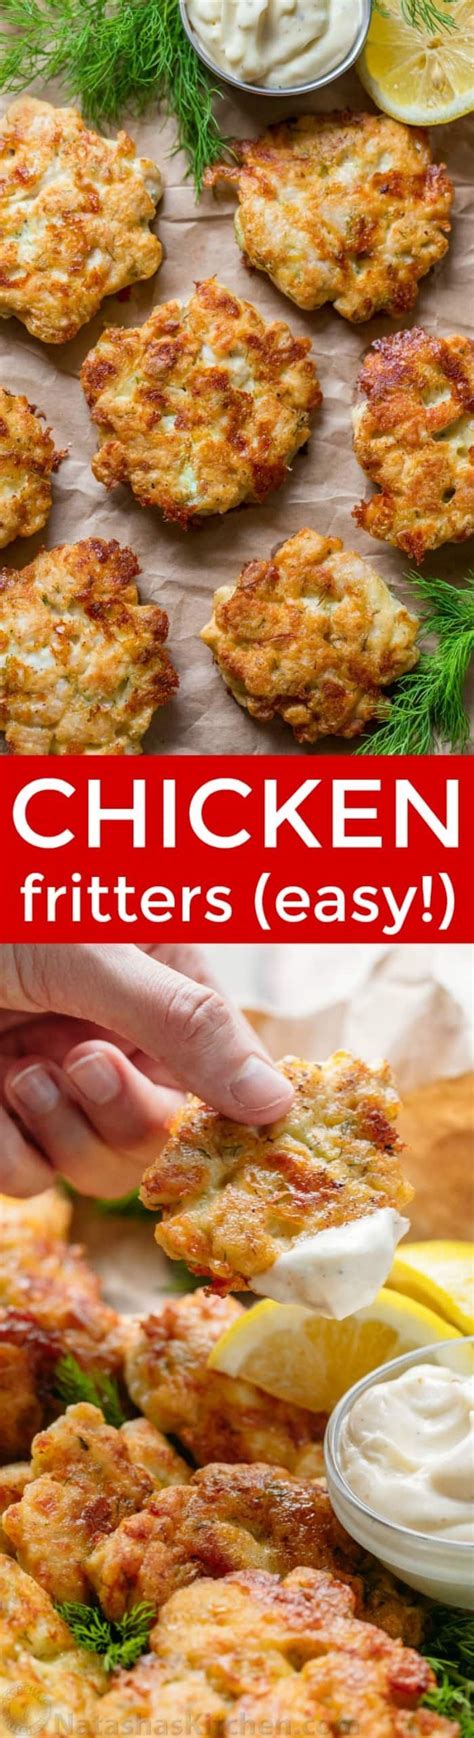 Cheesy Chicken Fritters Always Get Glowing Reviews If You Love Easy